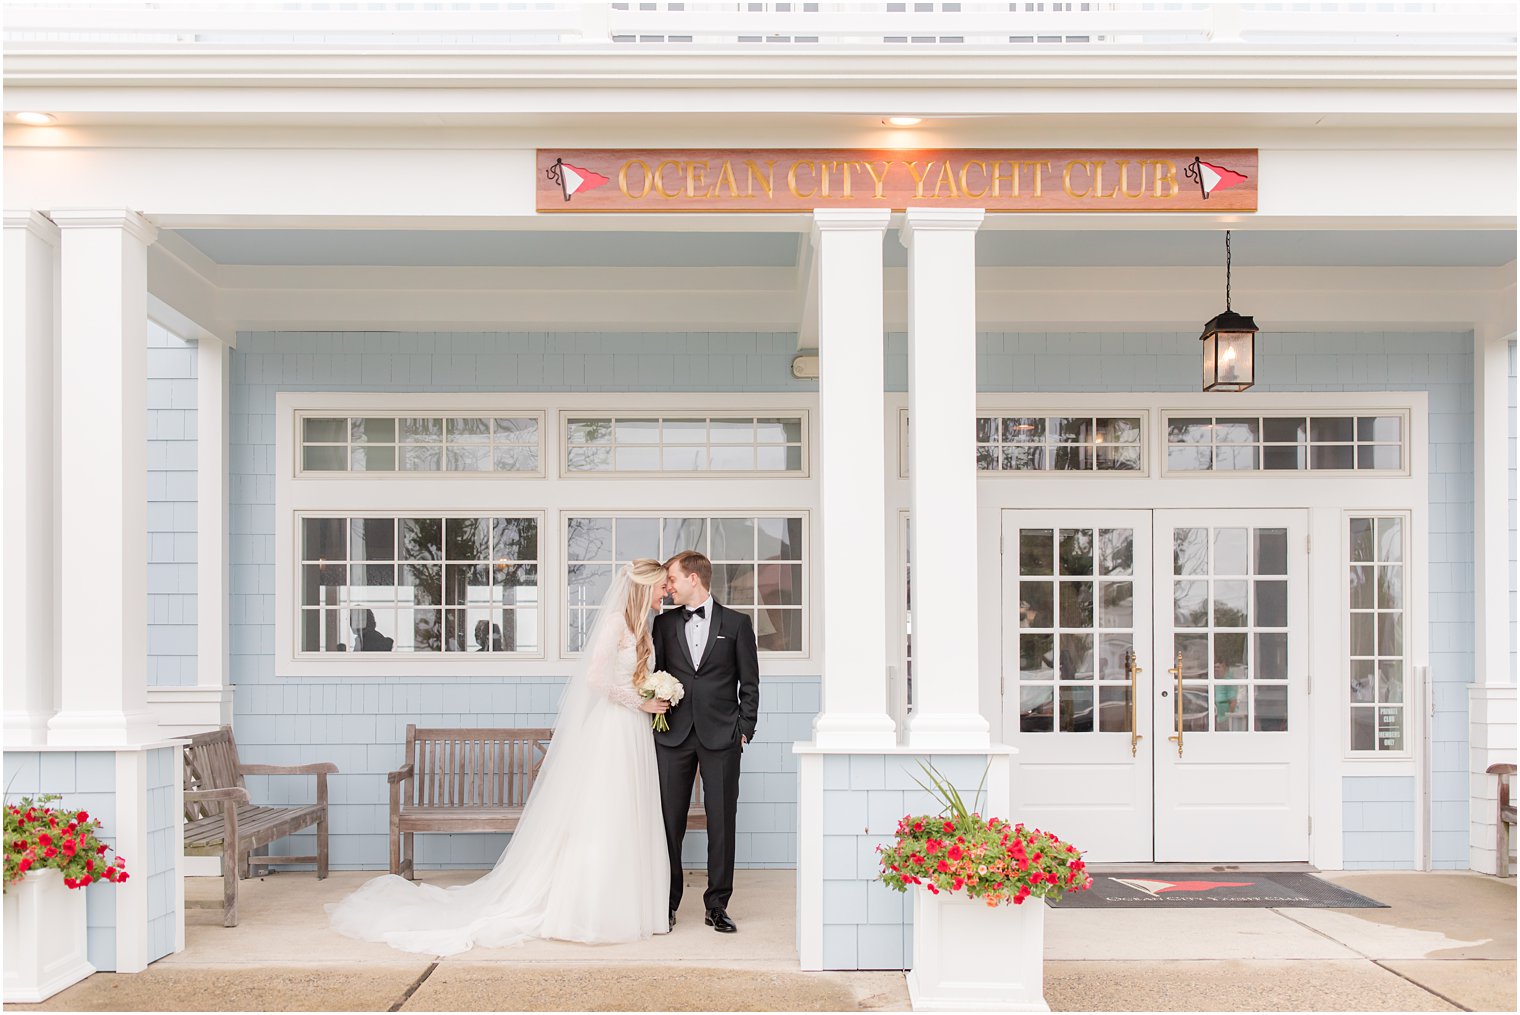 couple poses under awning at Ocean City Yacht Club on rainy wedding day